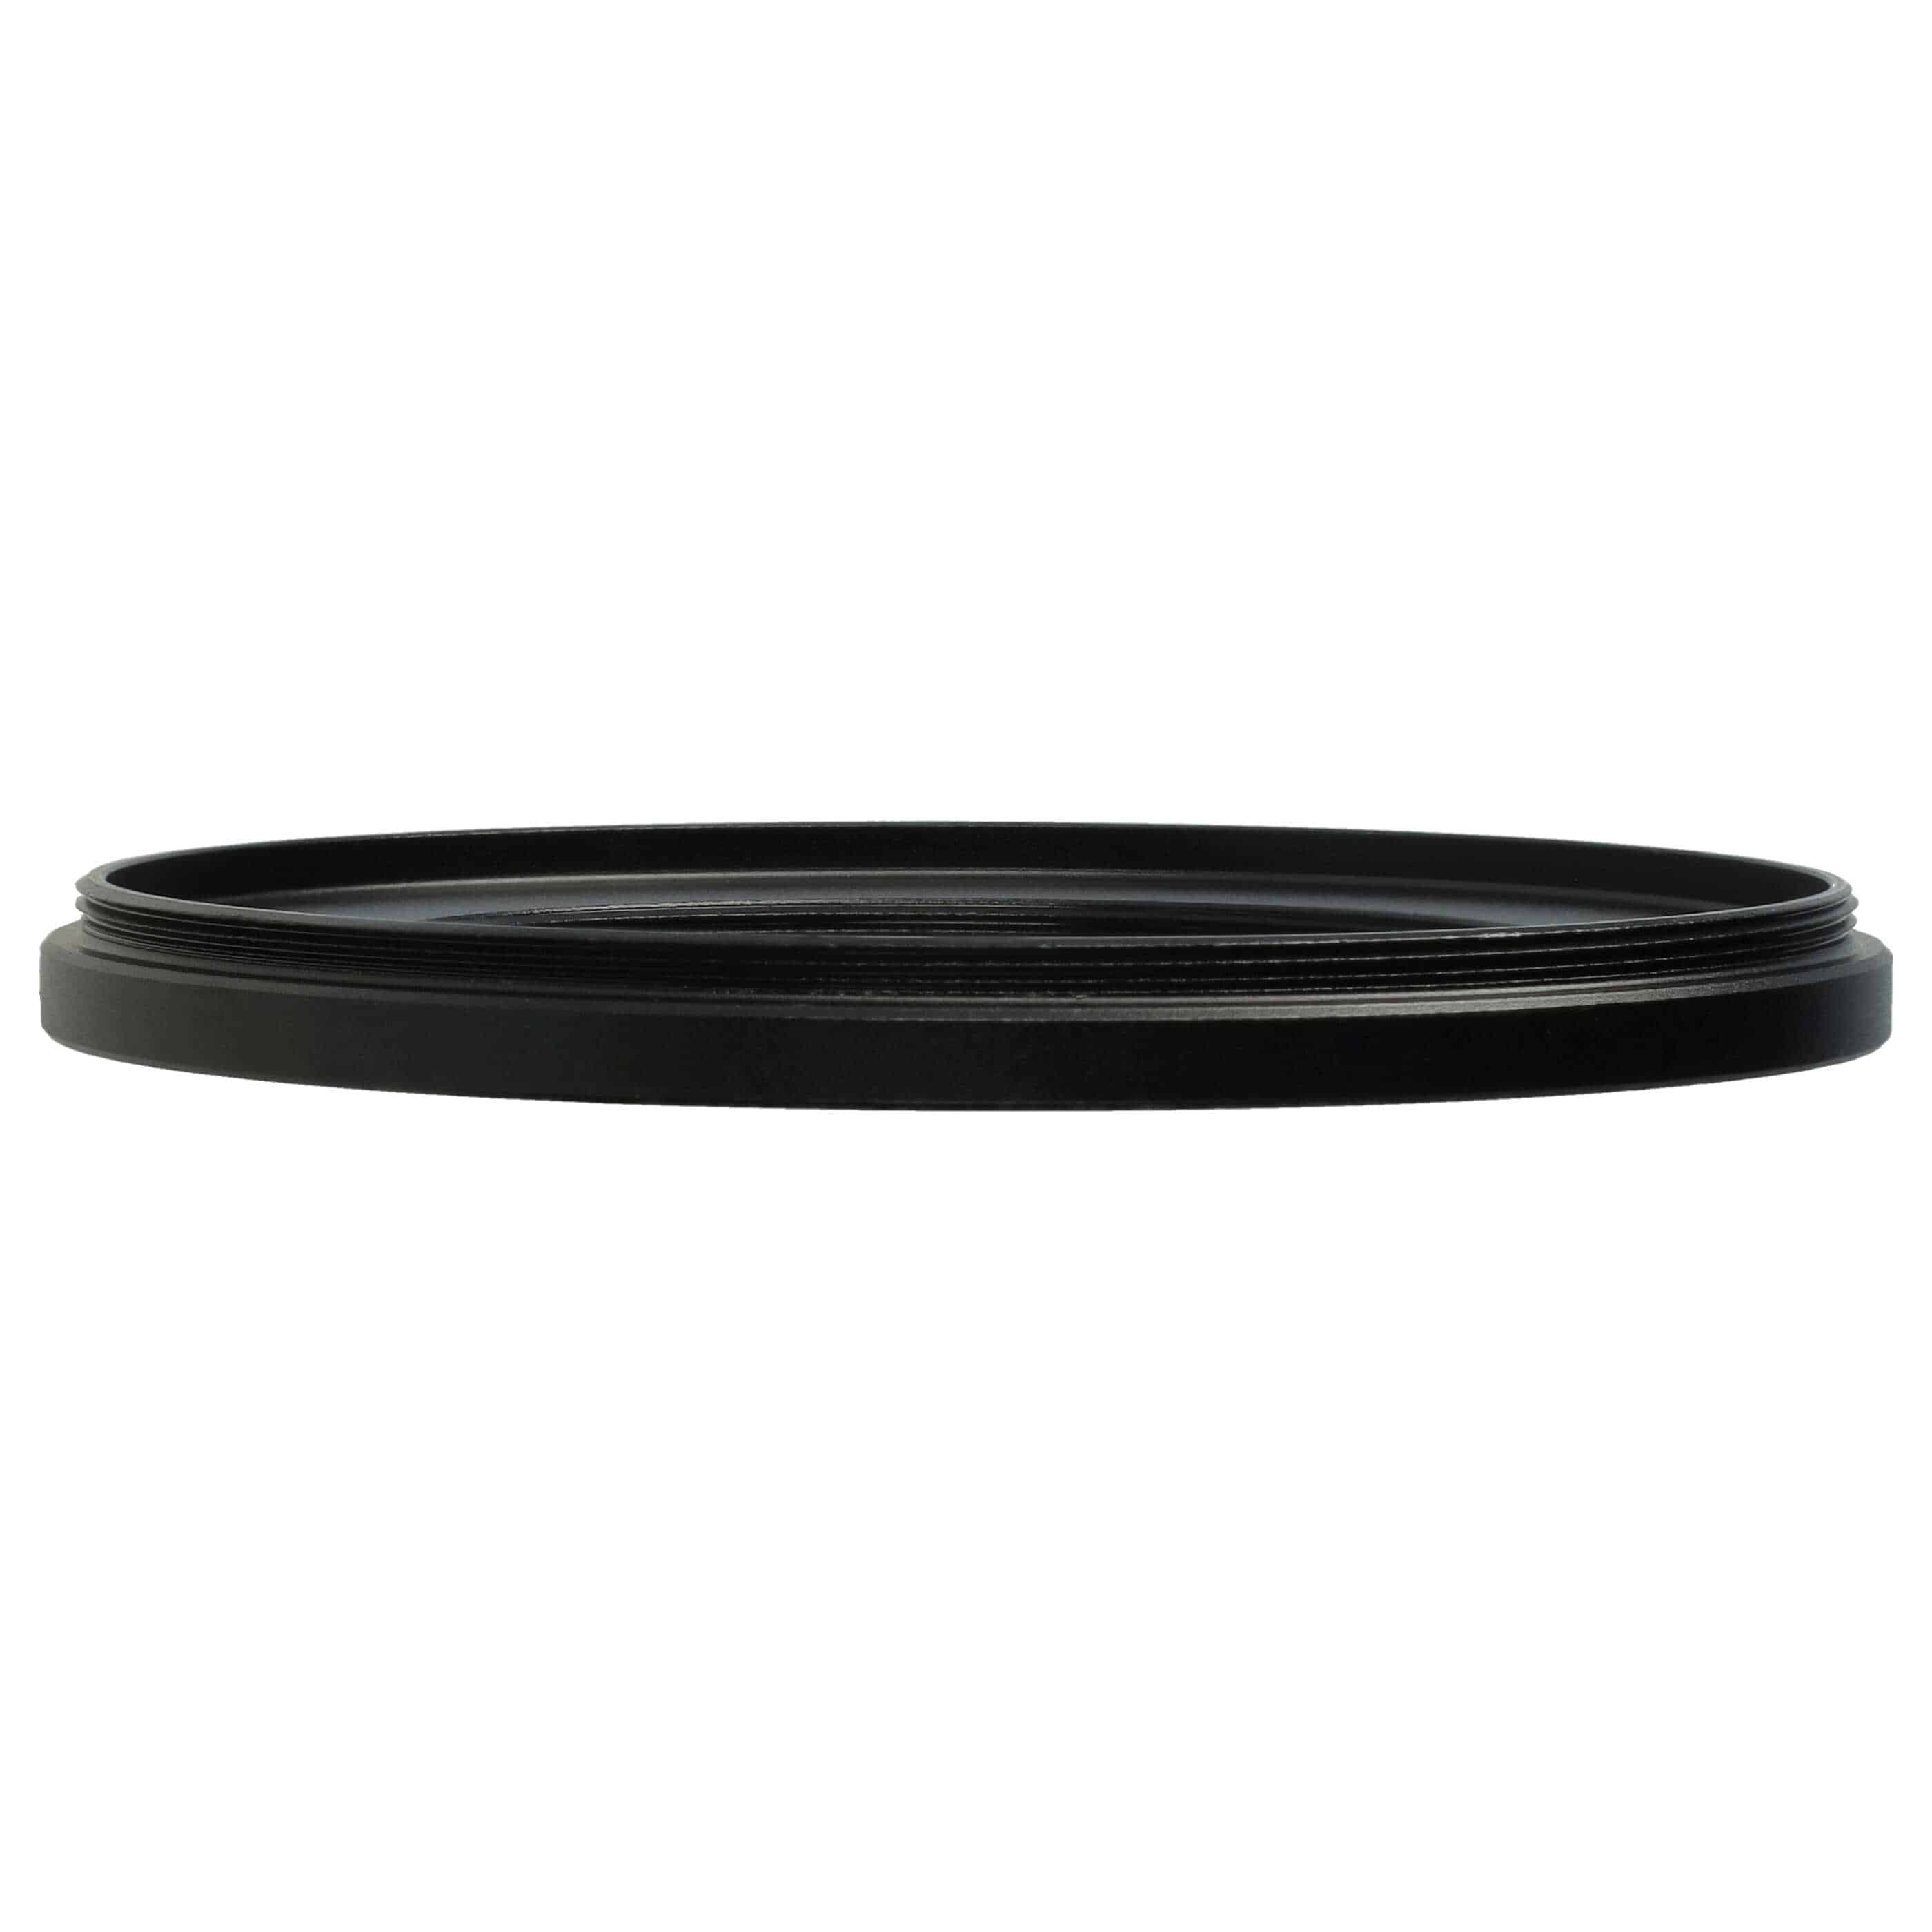 Step-Down Ring Adapter from 72 mm to 49 mm for various Camera Lenses